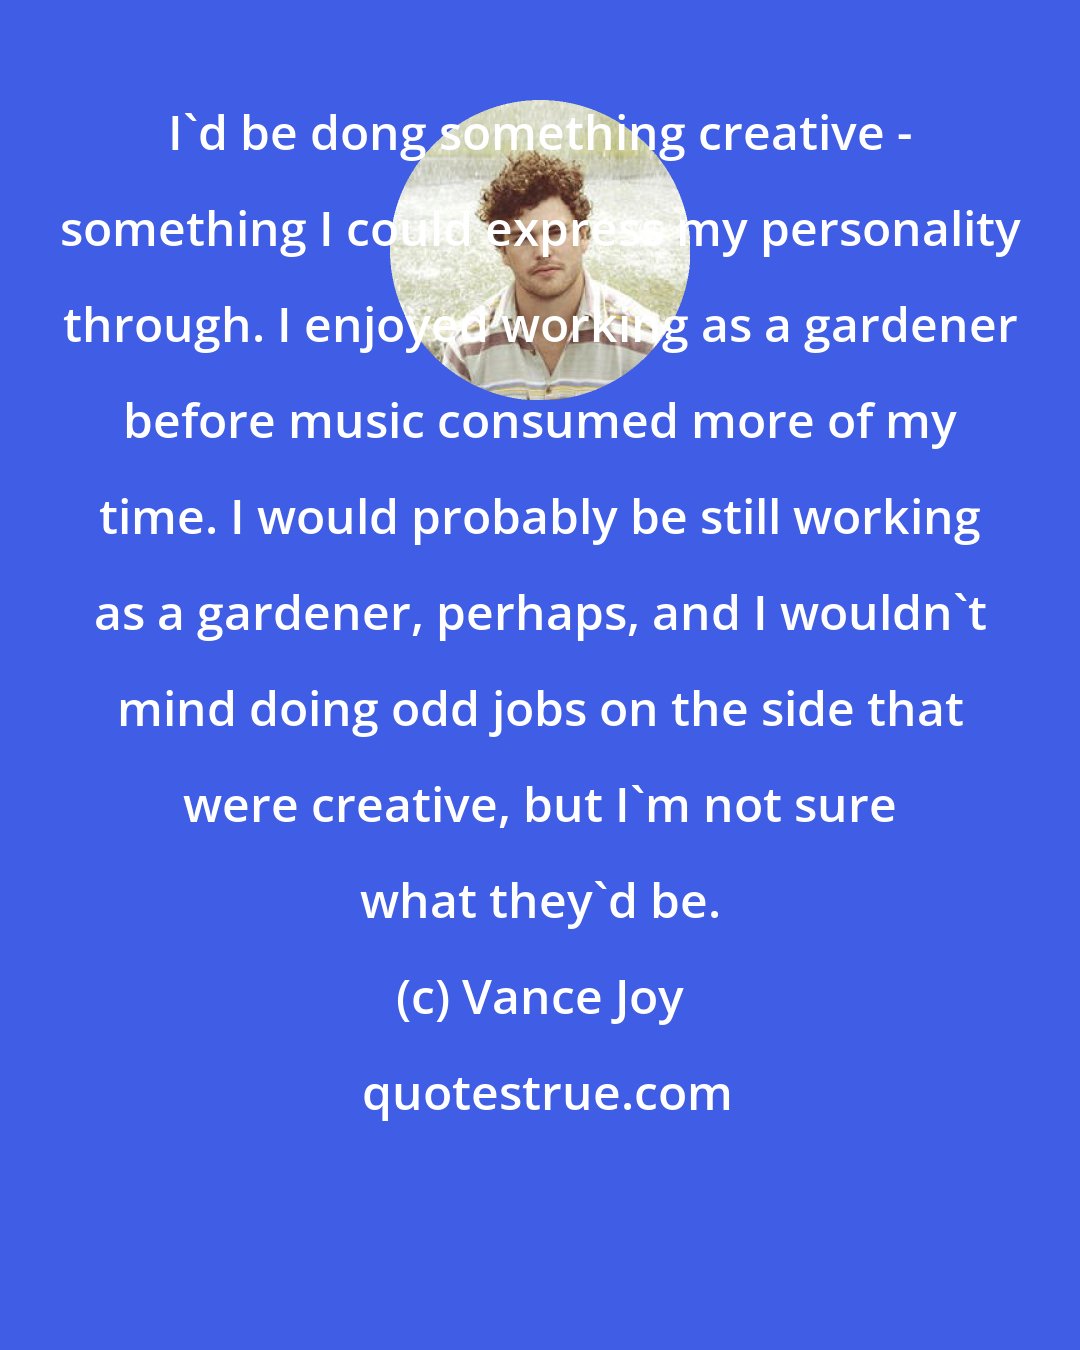 Vance Joy: I'd be dong something creative - something I could express my personality through. I enjoyed working as a gardener before music consumed more of my time. I would probably be still working as a gardener, perhaps, and I wouldn't mind doing odd jobs on the side that were creative, but I'm not sure what they'd be.